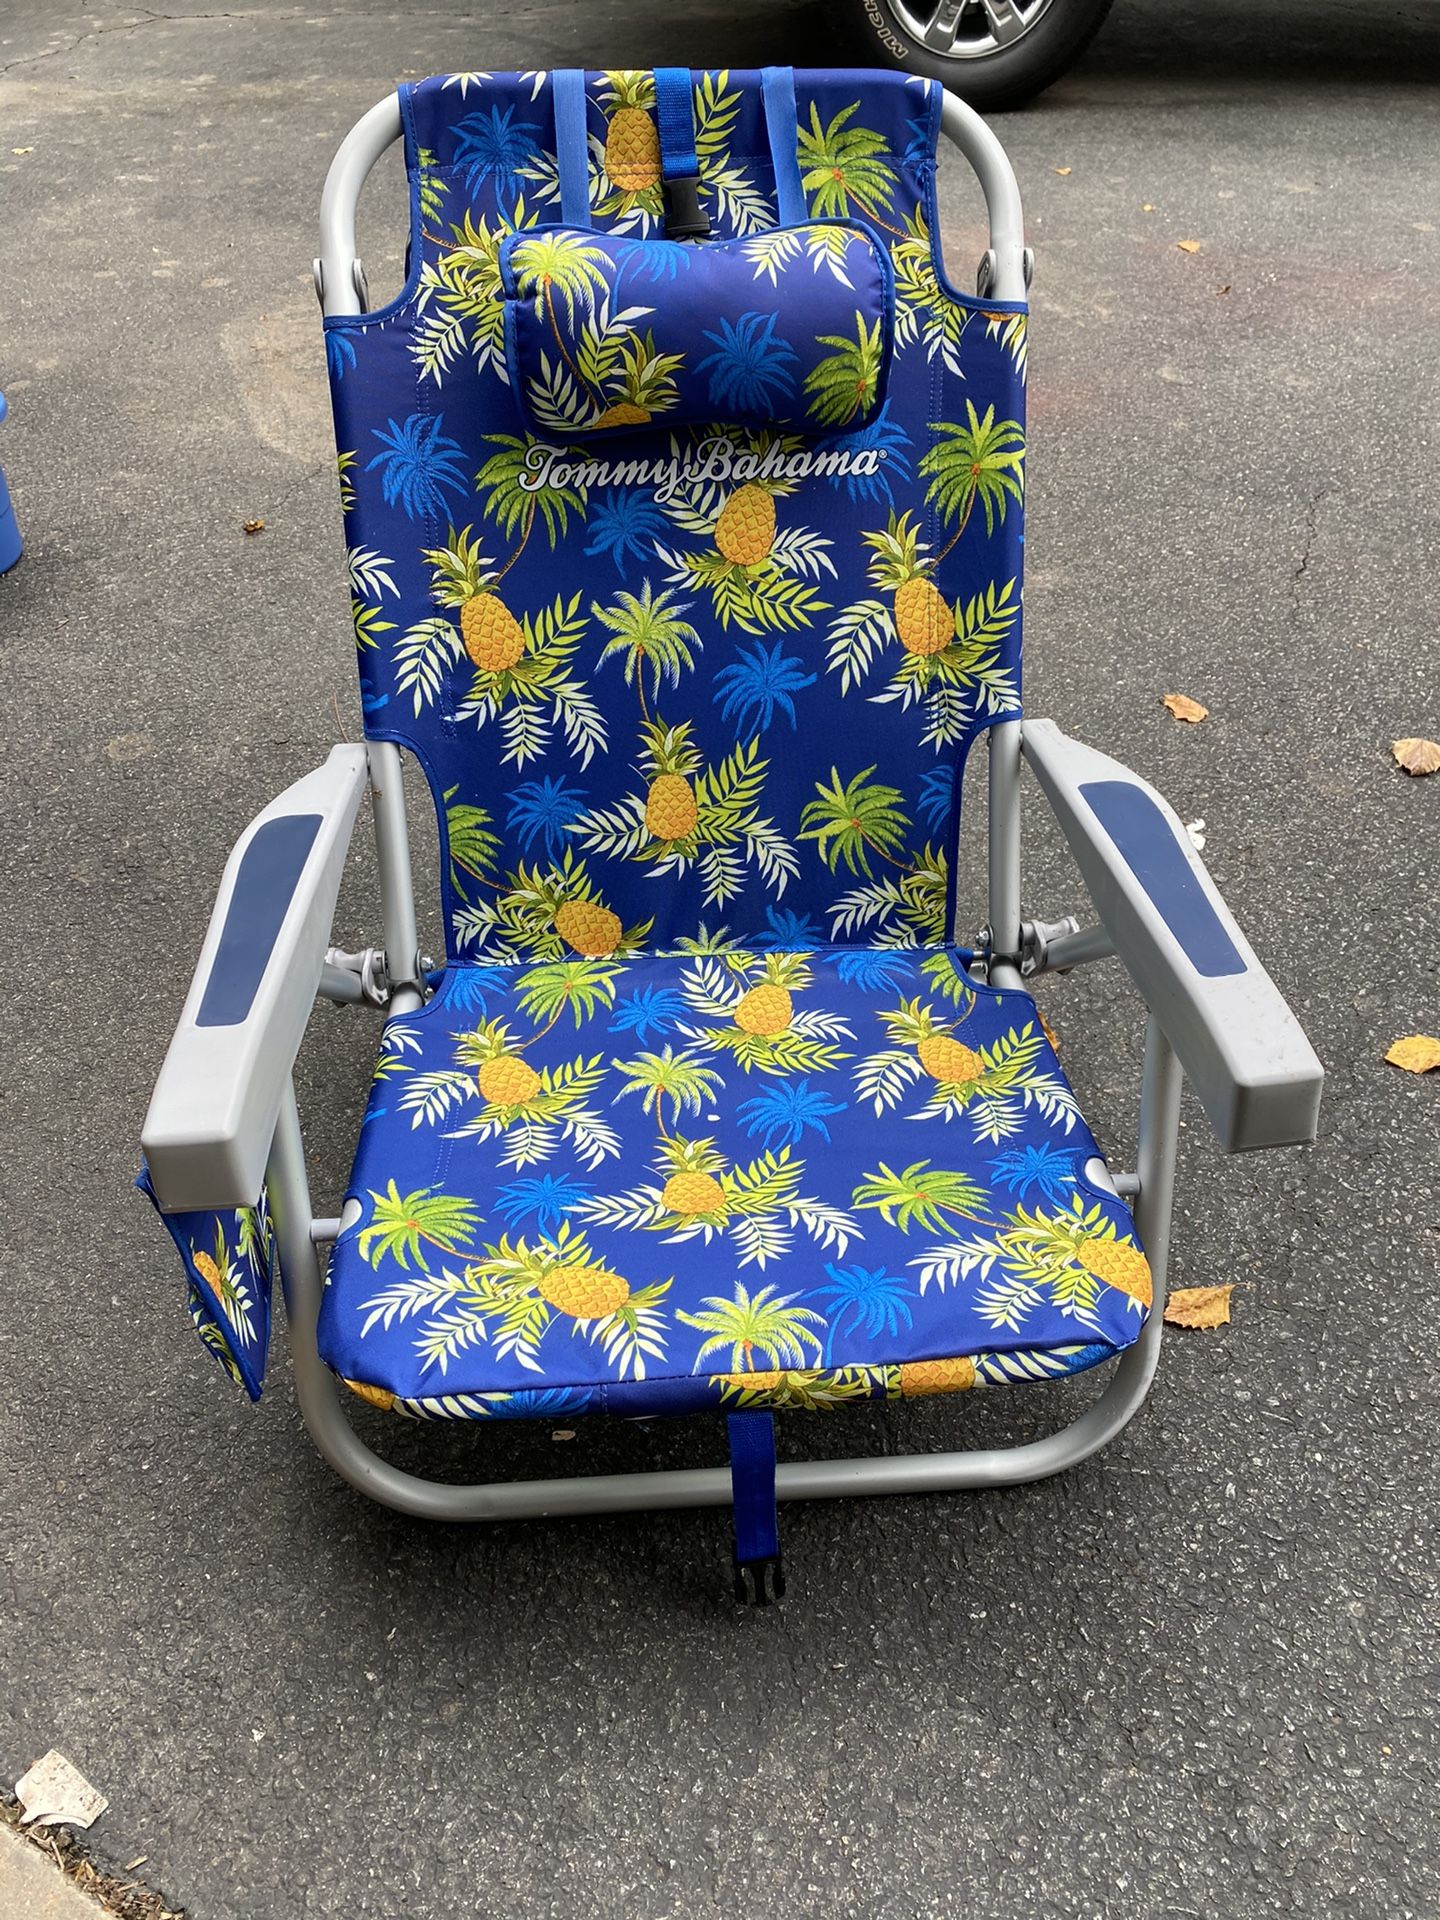 Tommy Bahama Cooler/Backpack Chair